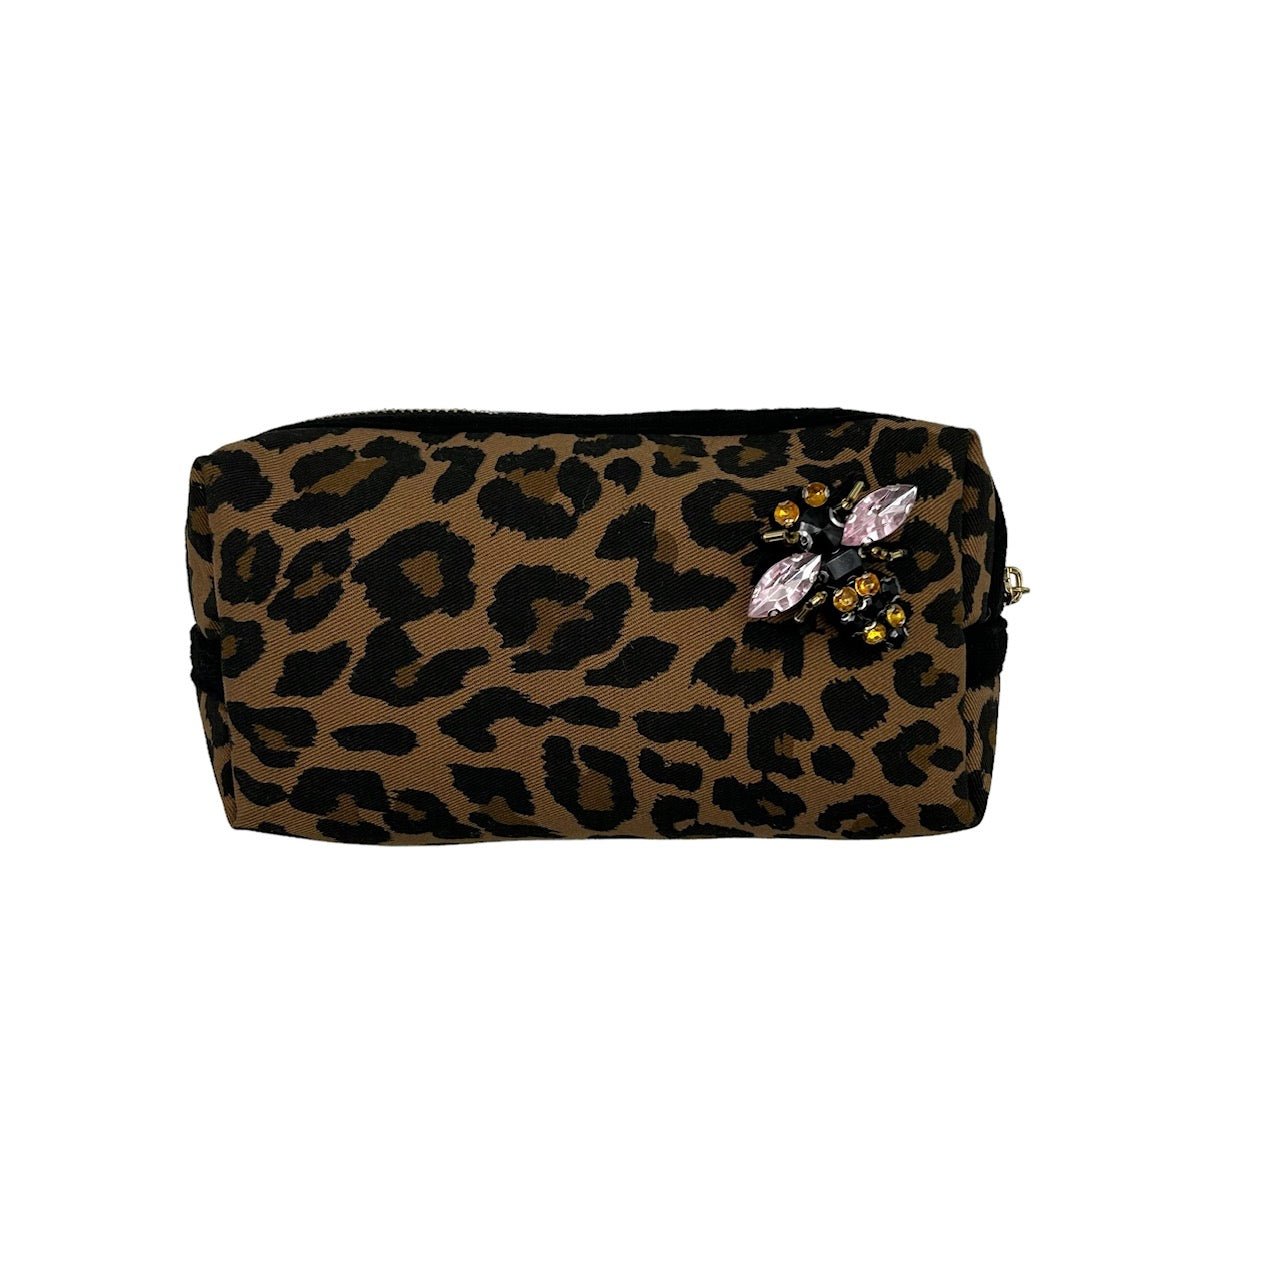 Leopard print make-up bag, large and small, with italian bee brooch